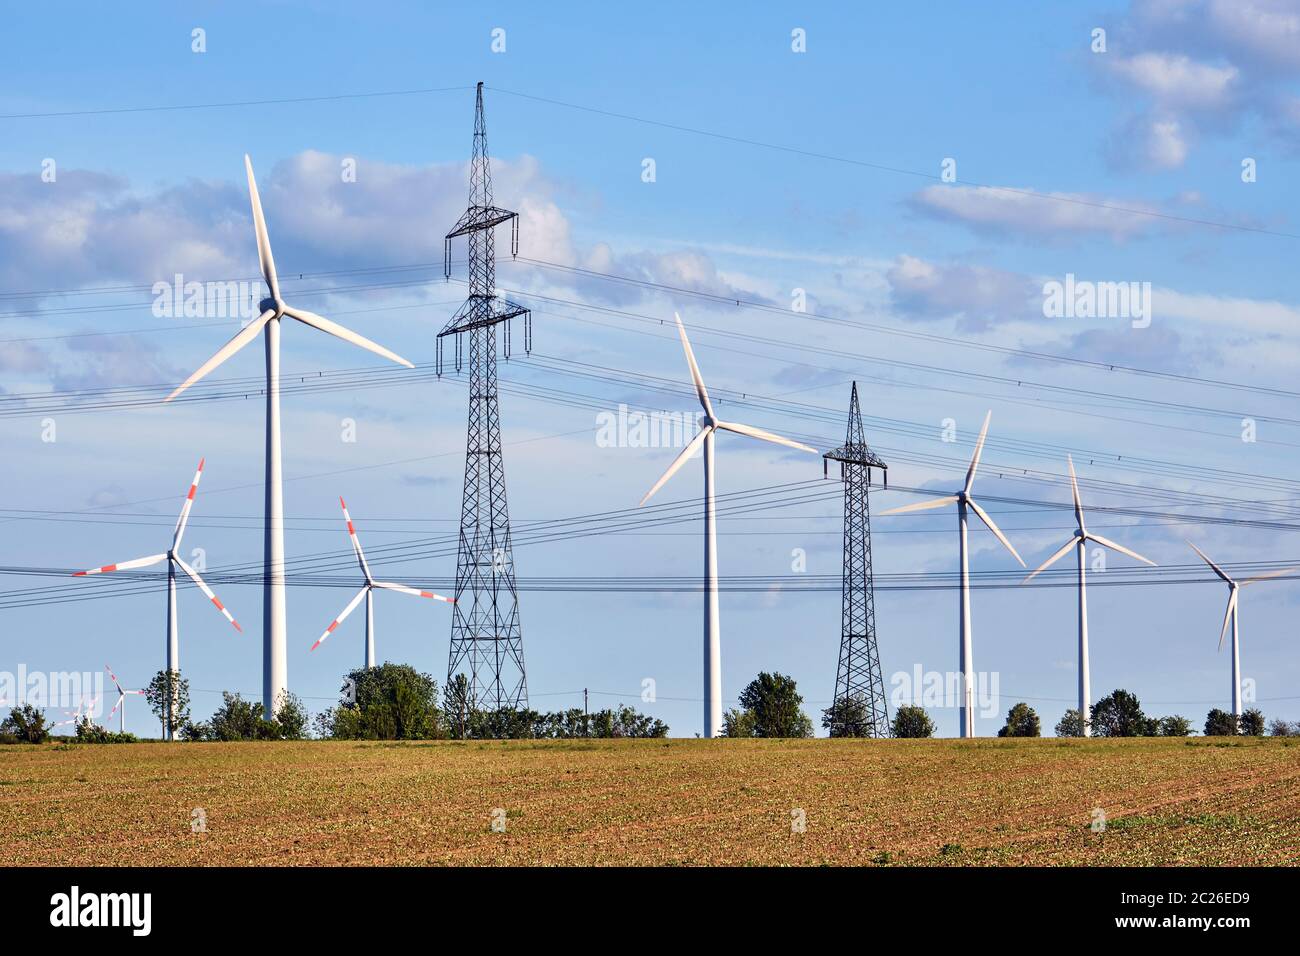 Wind turbines and power lines behind an acre seen in Germany Stock Photo